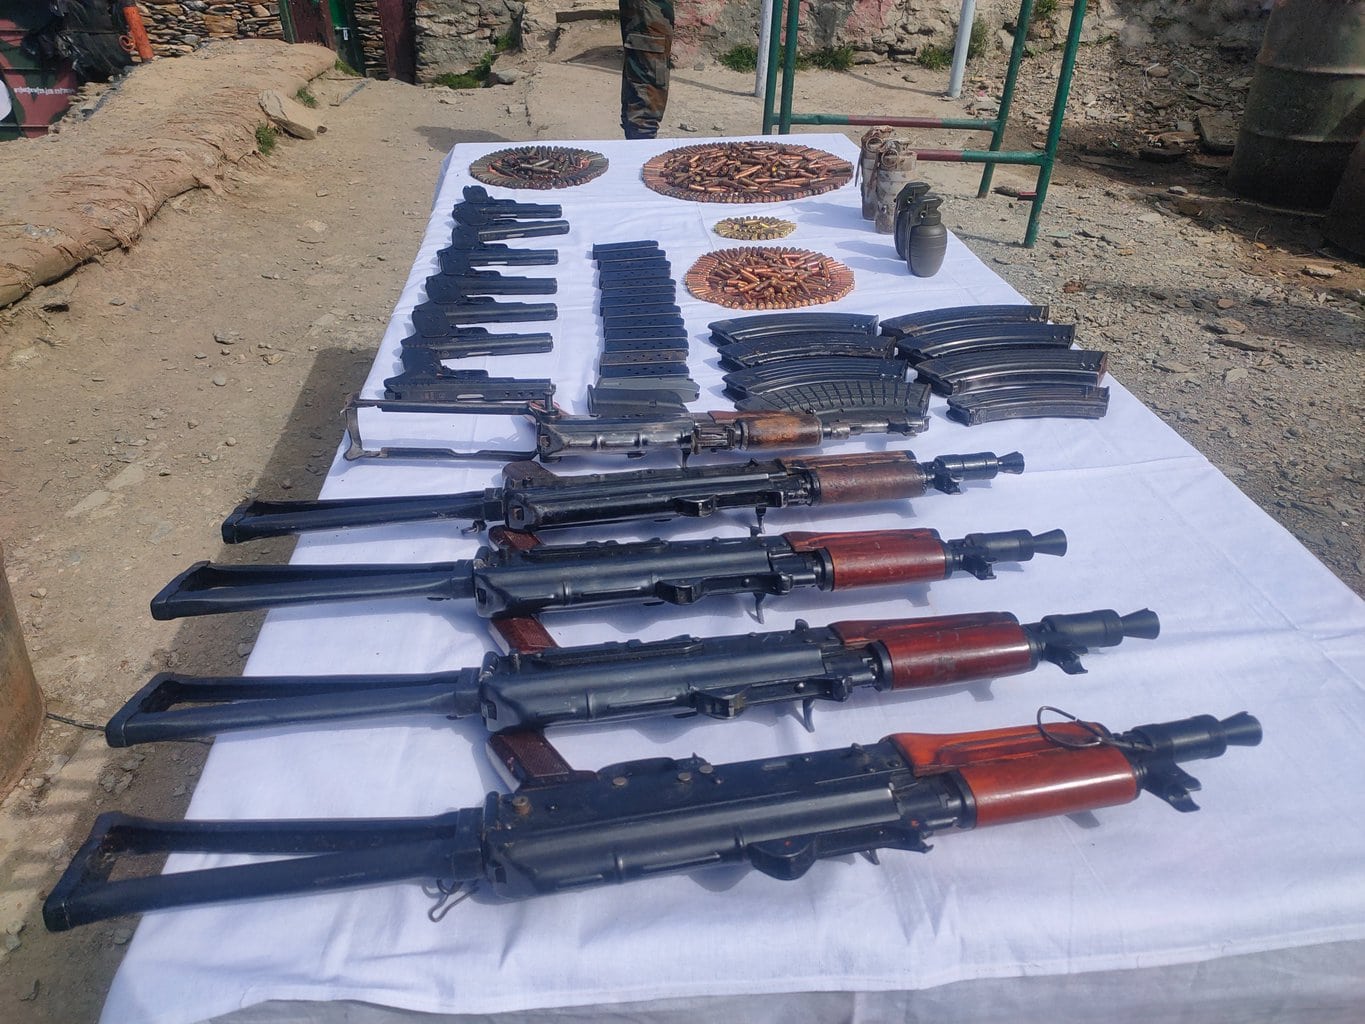 j k weapons ammunition recovered in kupwara 1 – The News Mill